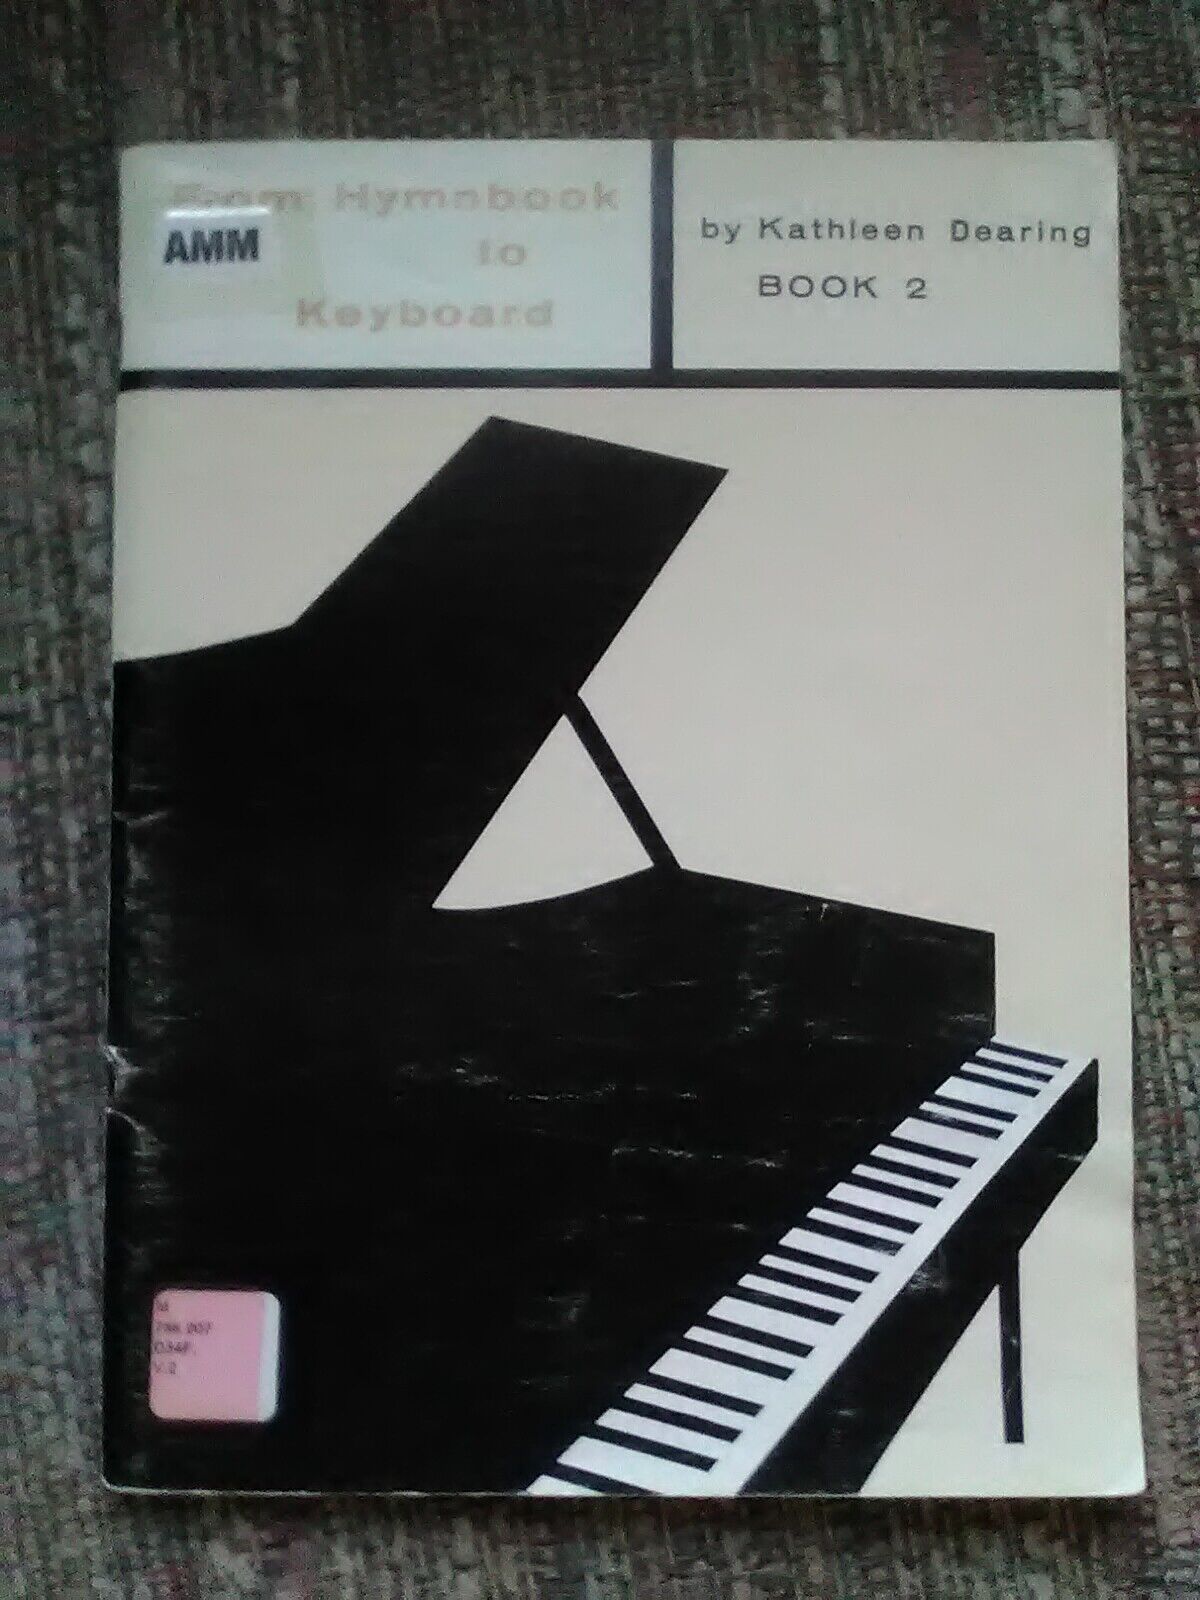 FROM HYMNBOOK TO KEYBOARD, BOOK 2, BY KATHLEEN DEARING, 10TH PRINTING, 1978